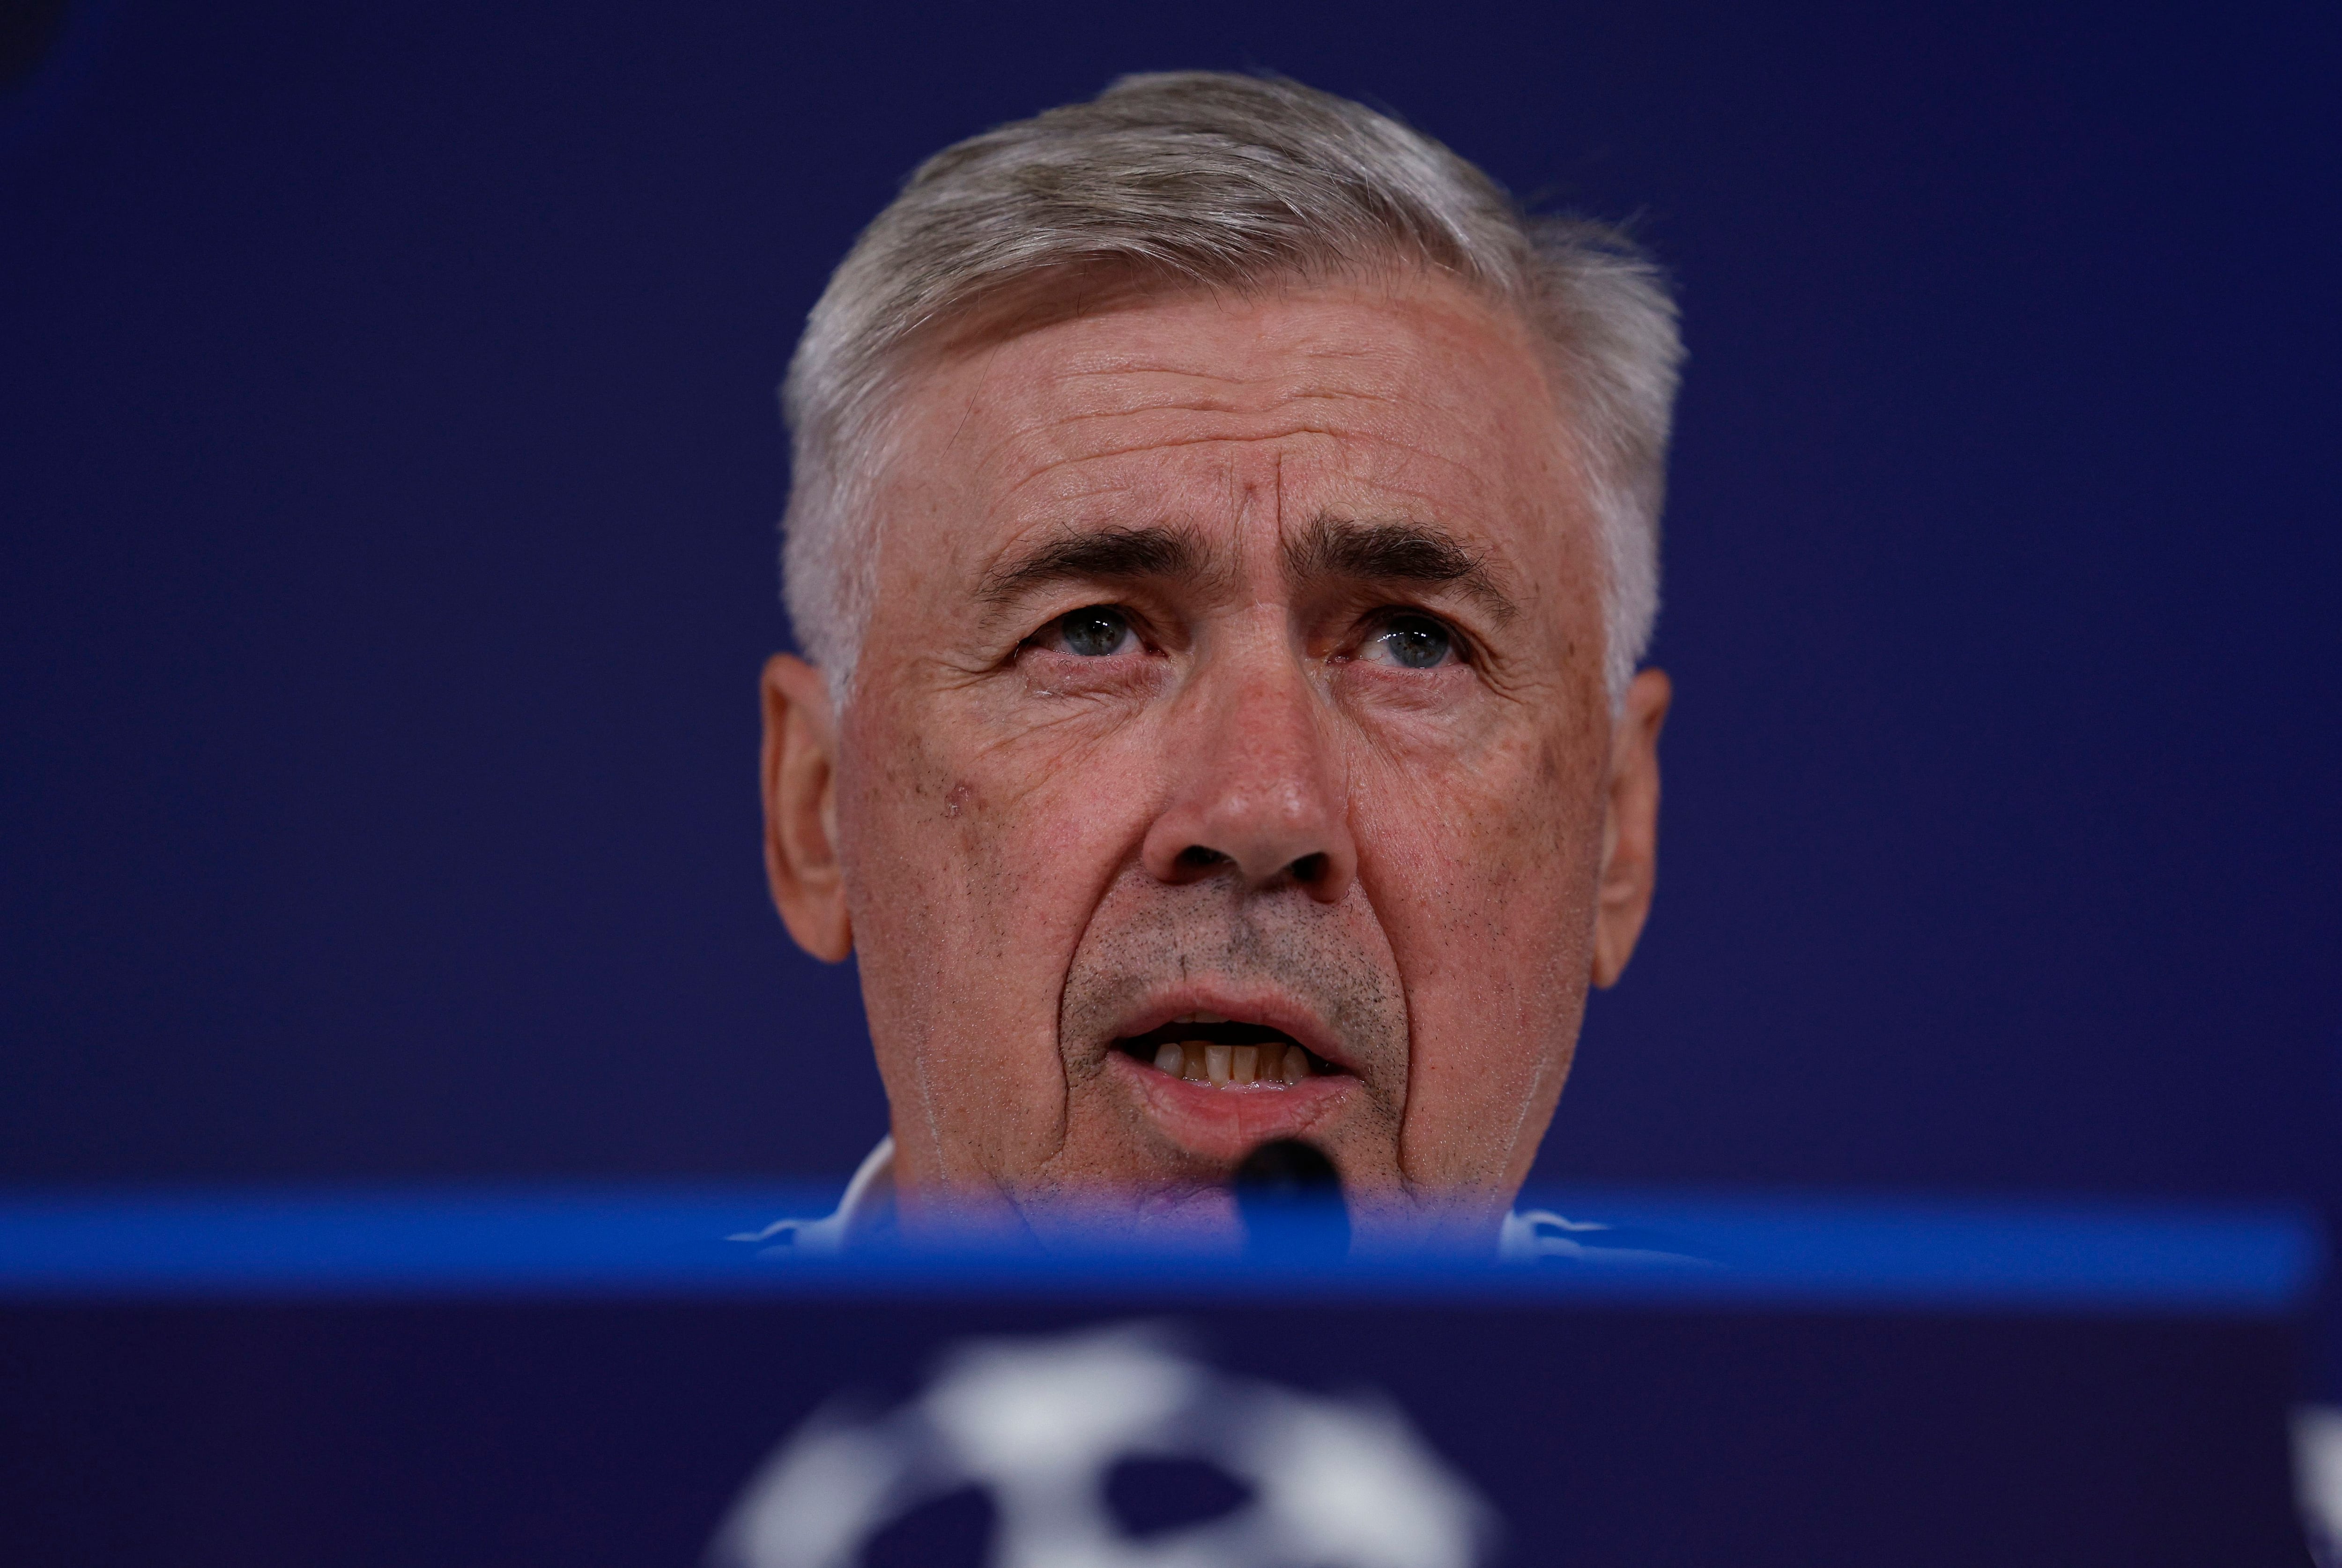 Soccer Football - Champions League - Real Madrid Press Conference - Ciudad Real Madrid, Madrid, Spain - October 4, 2022 Real Madrid coach Carlo Ancelotti during a press conference REUTERS/Susana Vera